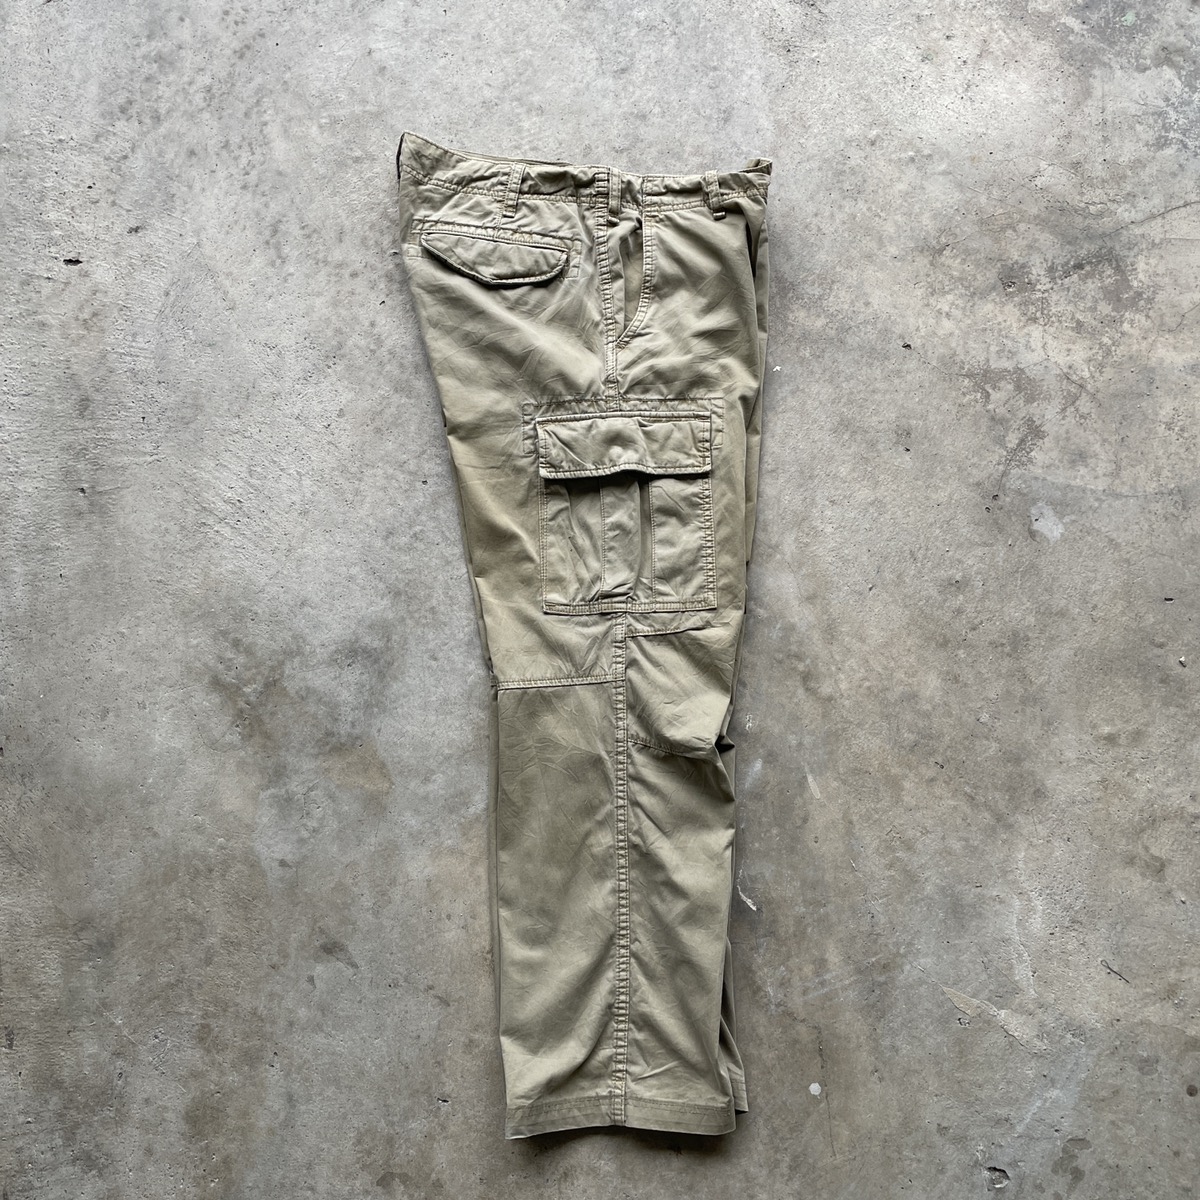 Vintage - Japanese Brand Faded Multipocket Tactical Cargo Pants W33x28 - 9